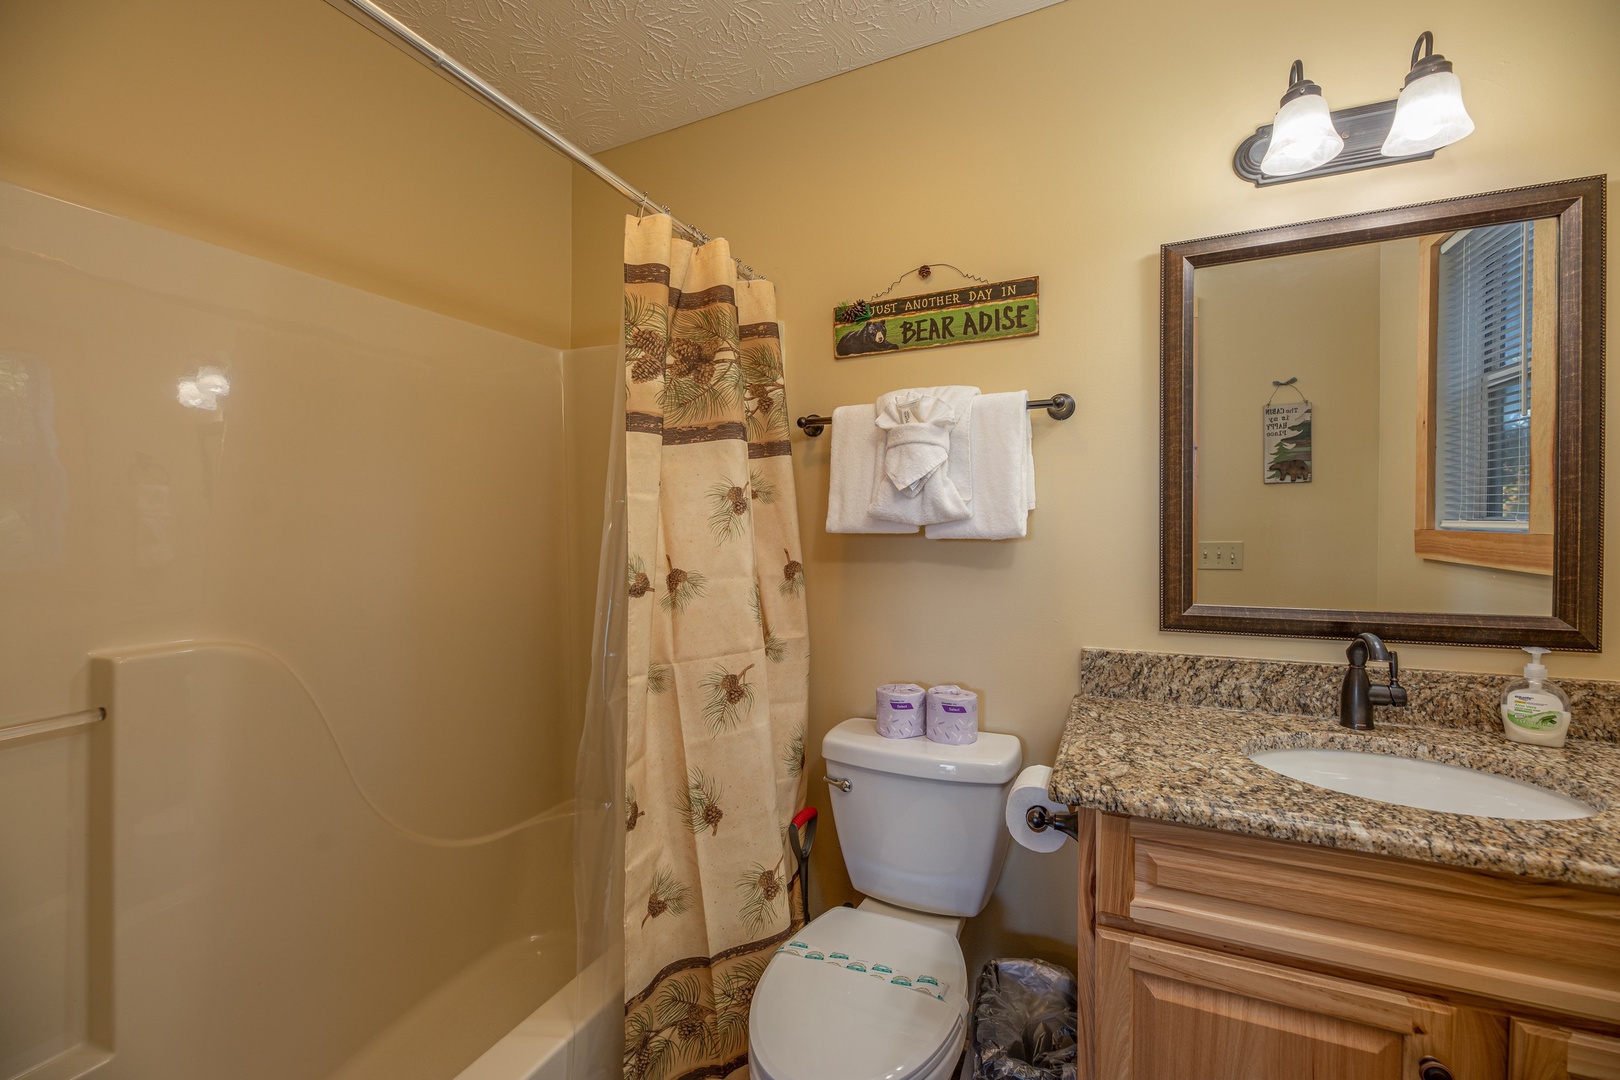 Bathroom with a tub and shower at Le Bear Chalet, a 7 bedroom cabin rental located in Gatlinburg